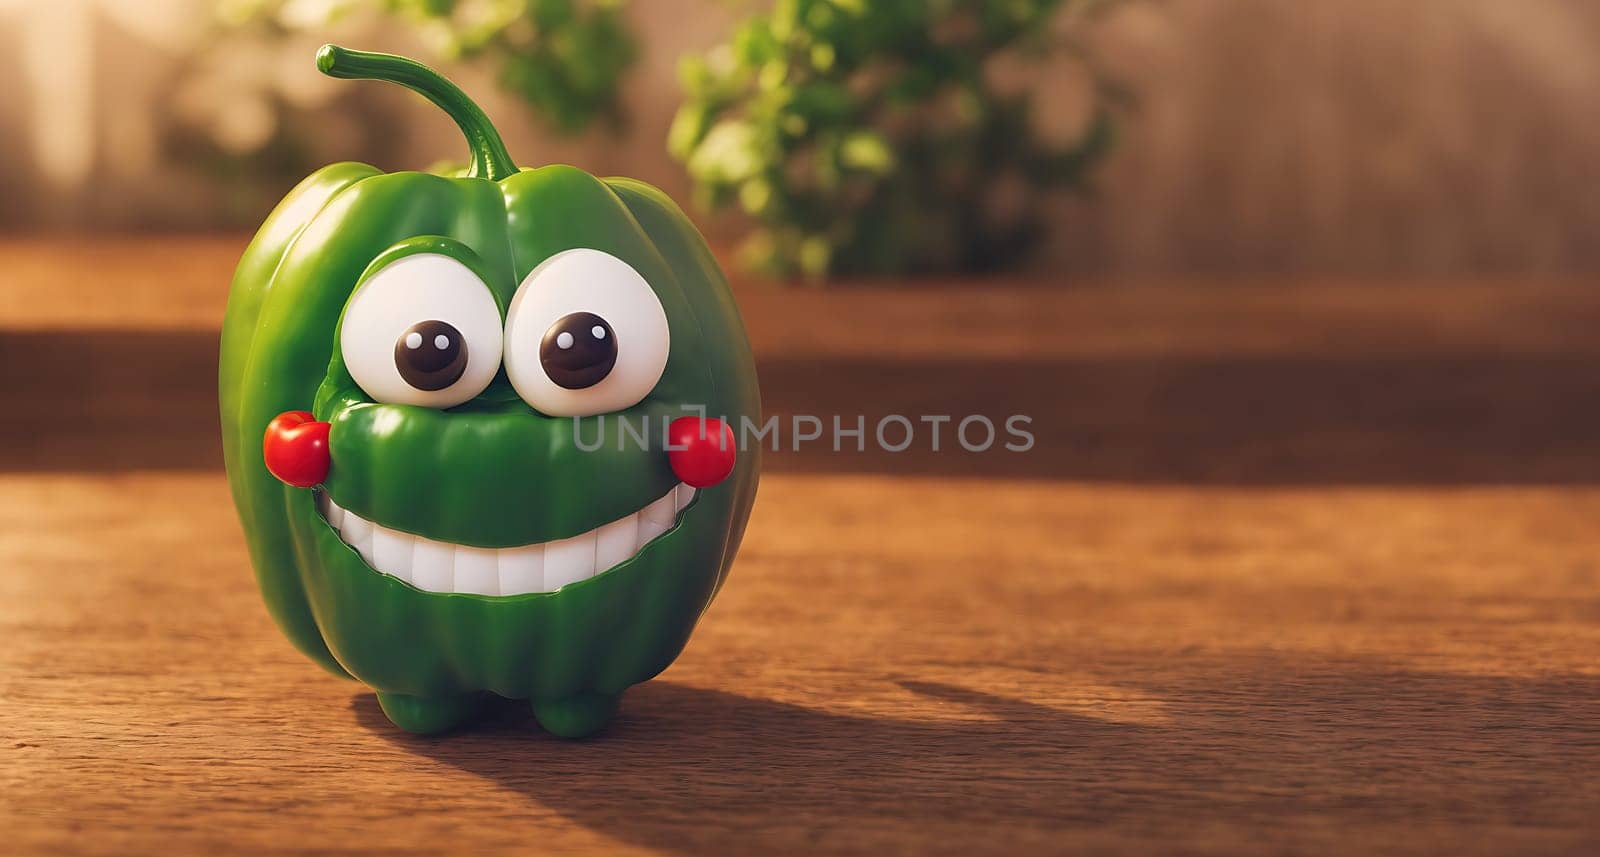 The image is of a green pepper with a smiling face, sitting on a wooden surface.